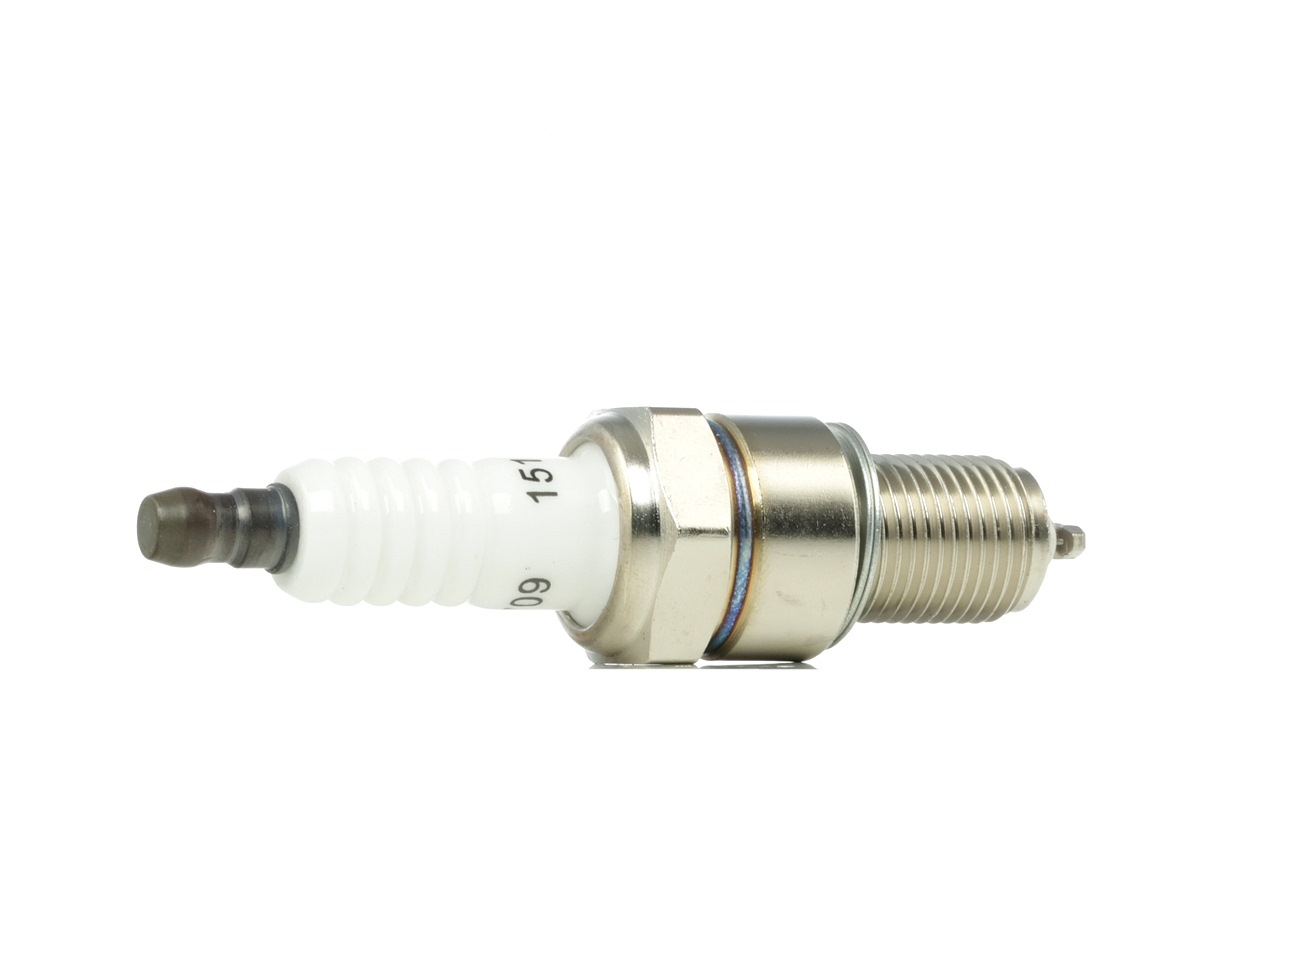 RIDEX 686S0137 Spark plug cheap in online store